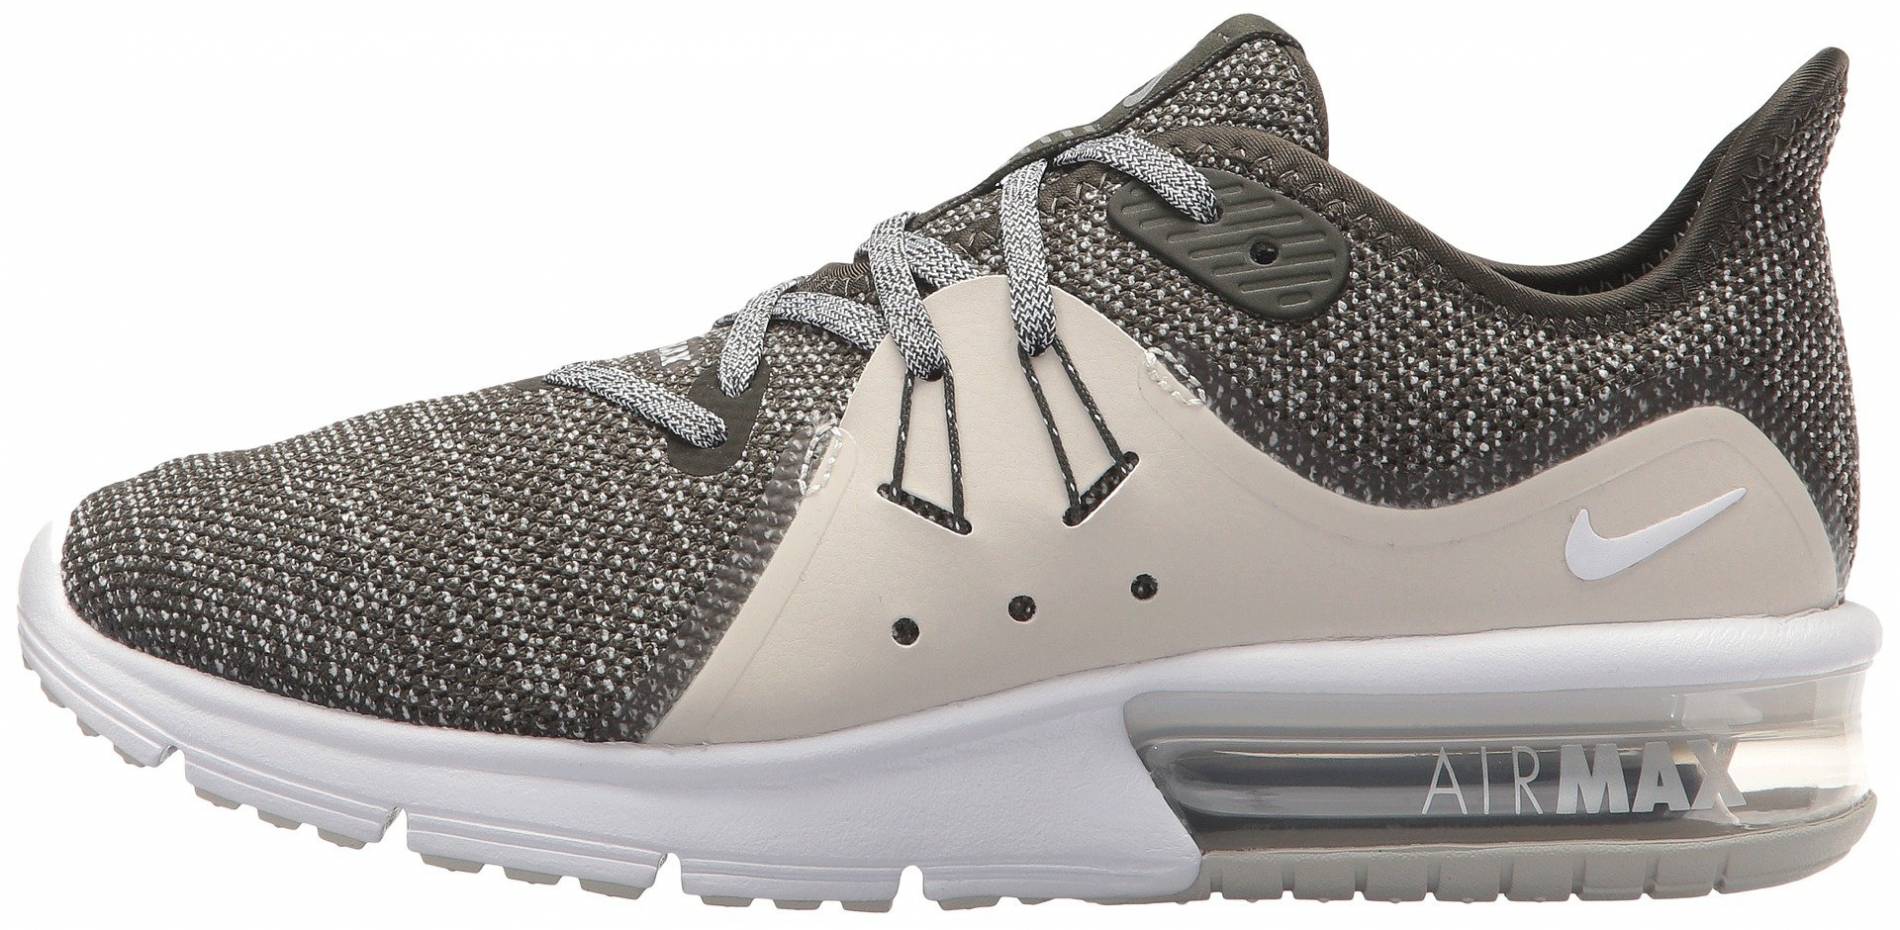 Nike Air Max Sequent 3 - Deals ($84), Facts, Reviews (2021 ...